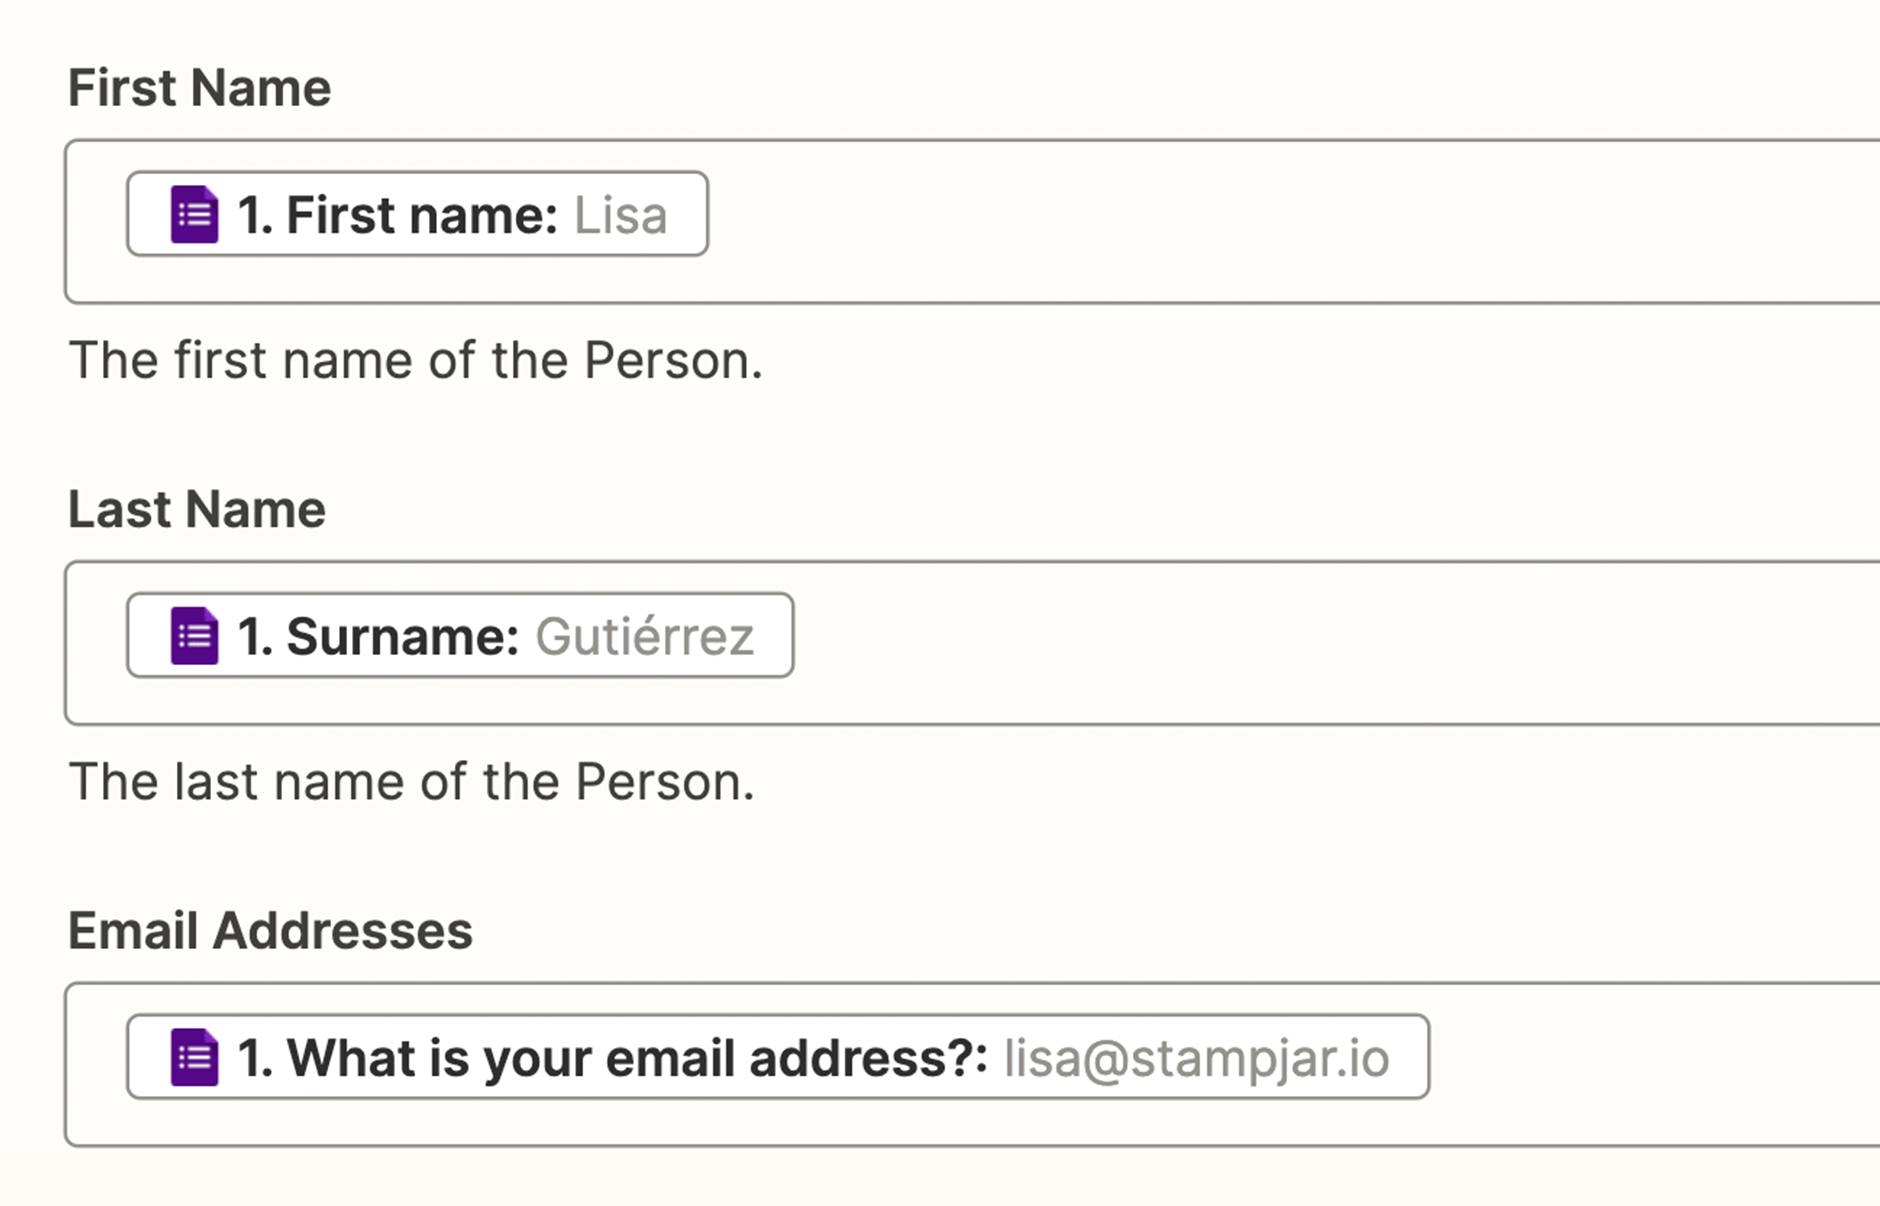 A Zap is being configured in Zapier, with fields being mapped to prior steps in the process. In this example, names and email addresses are being pulled from a Google Form to use elsewhere.